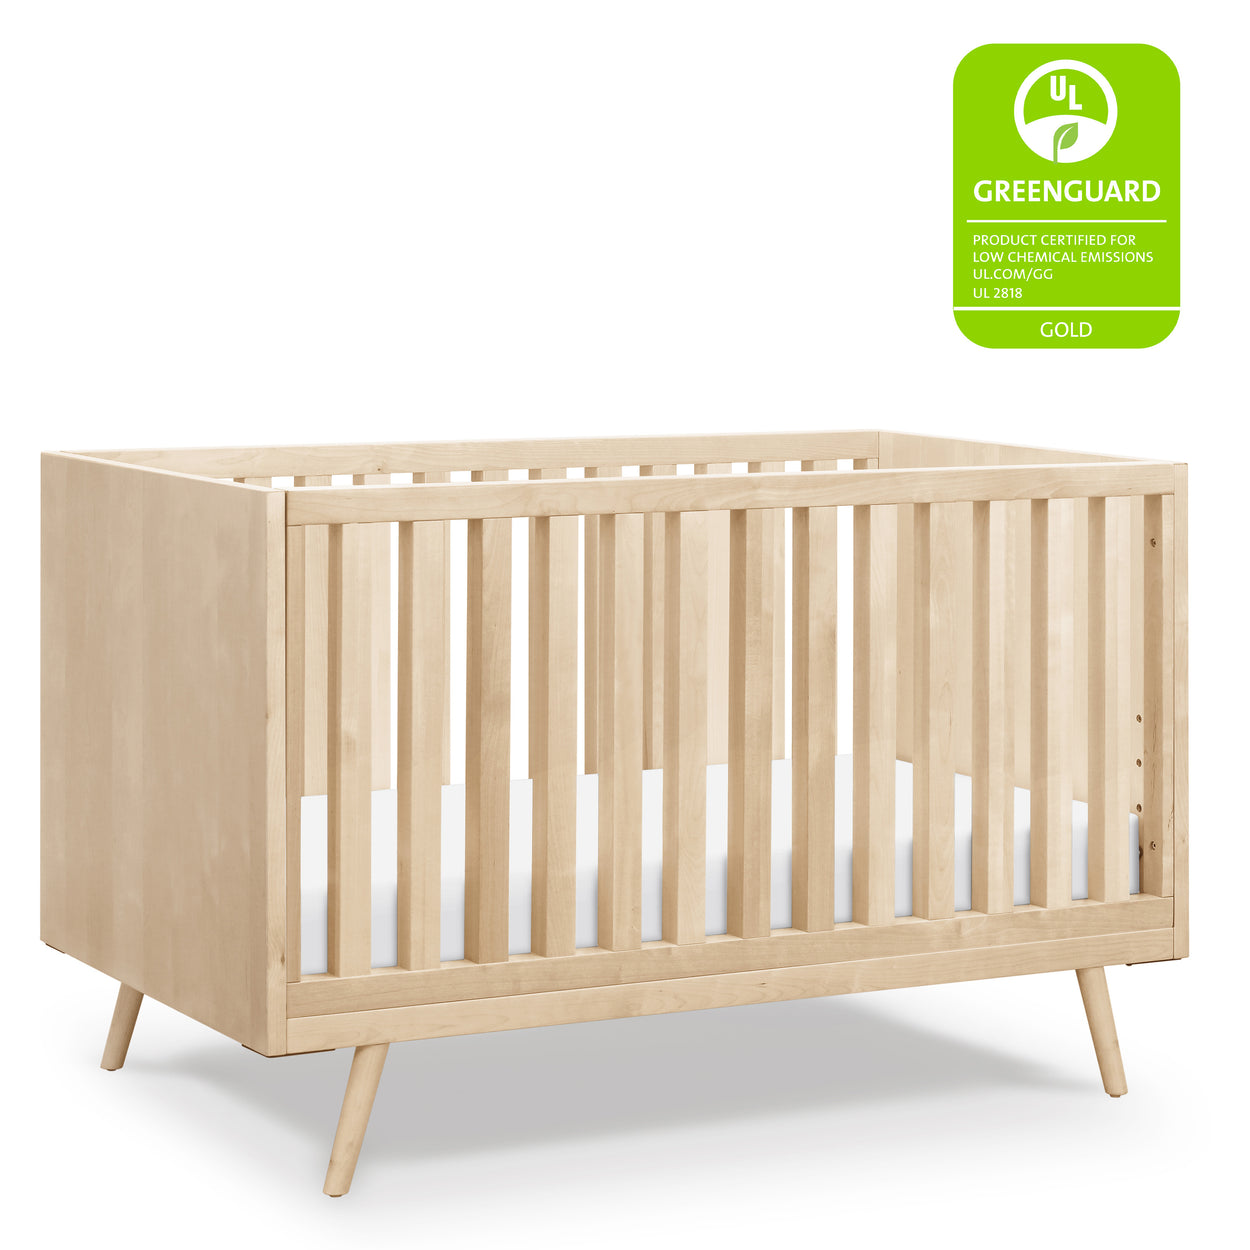 US0310BR,Nifty Timber 3-In-1 Crib in Natural Birch